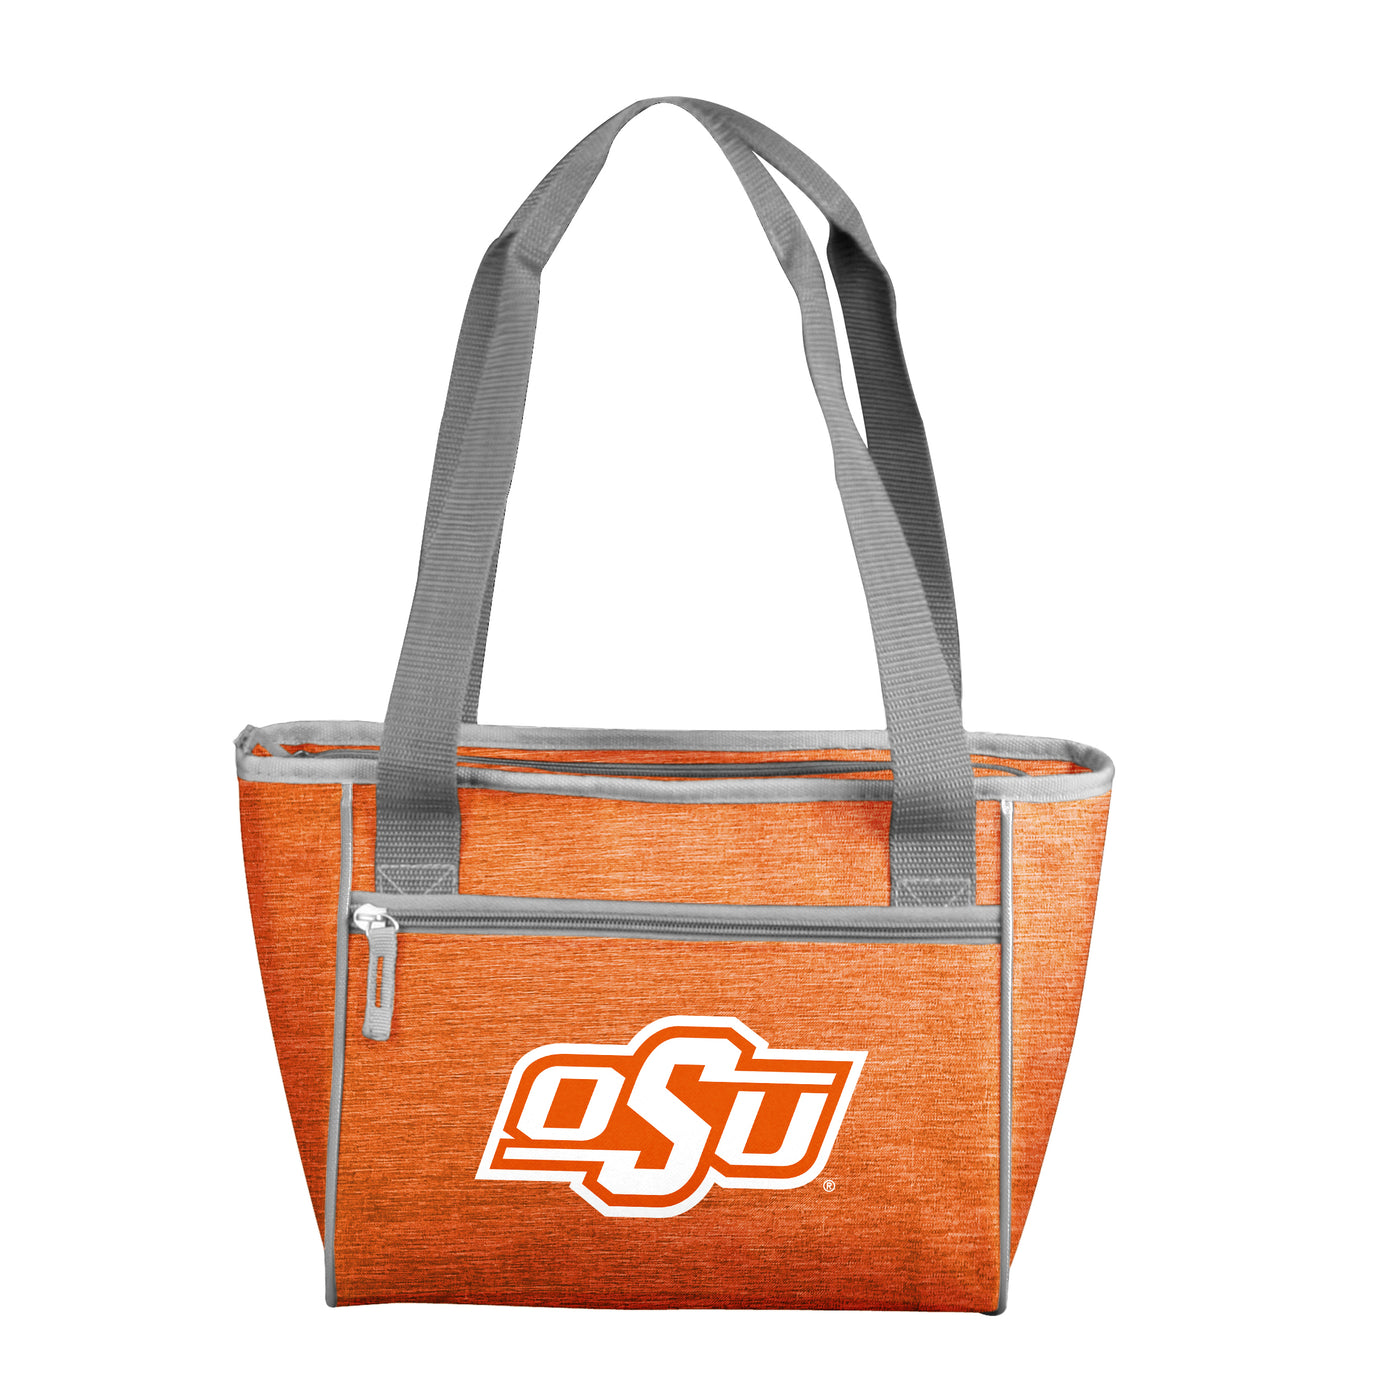 OK State Crosshatch 16 Can Cooler Tote